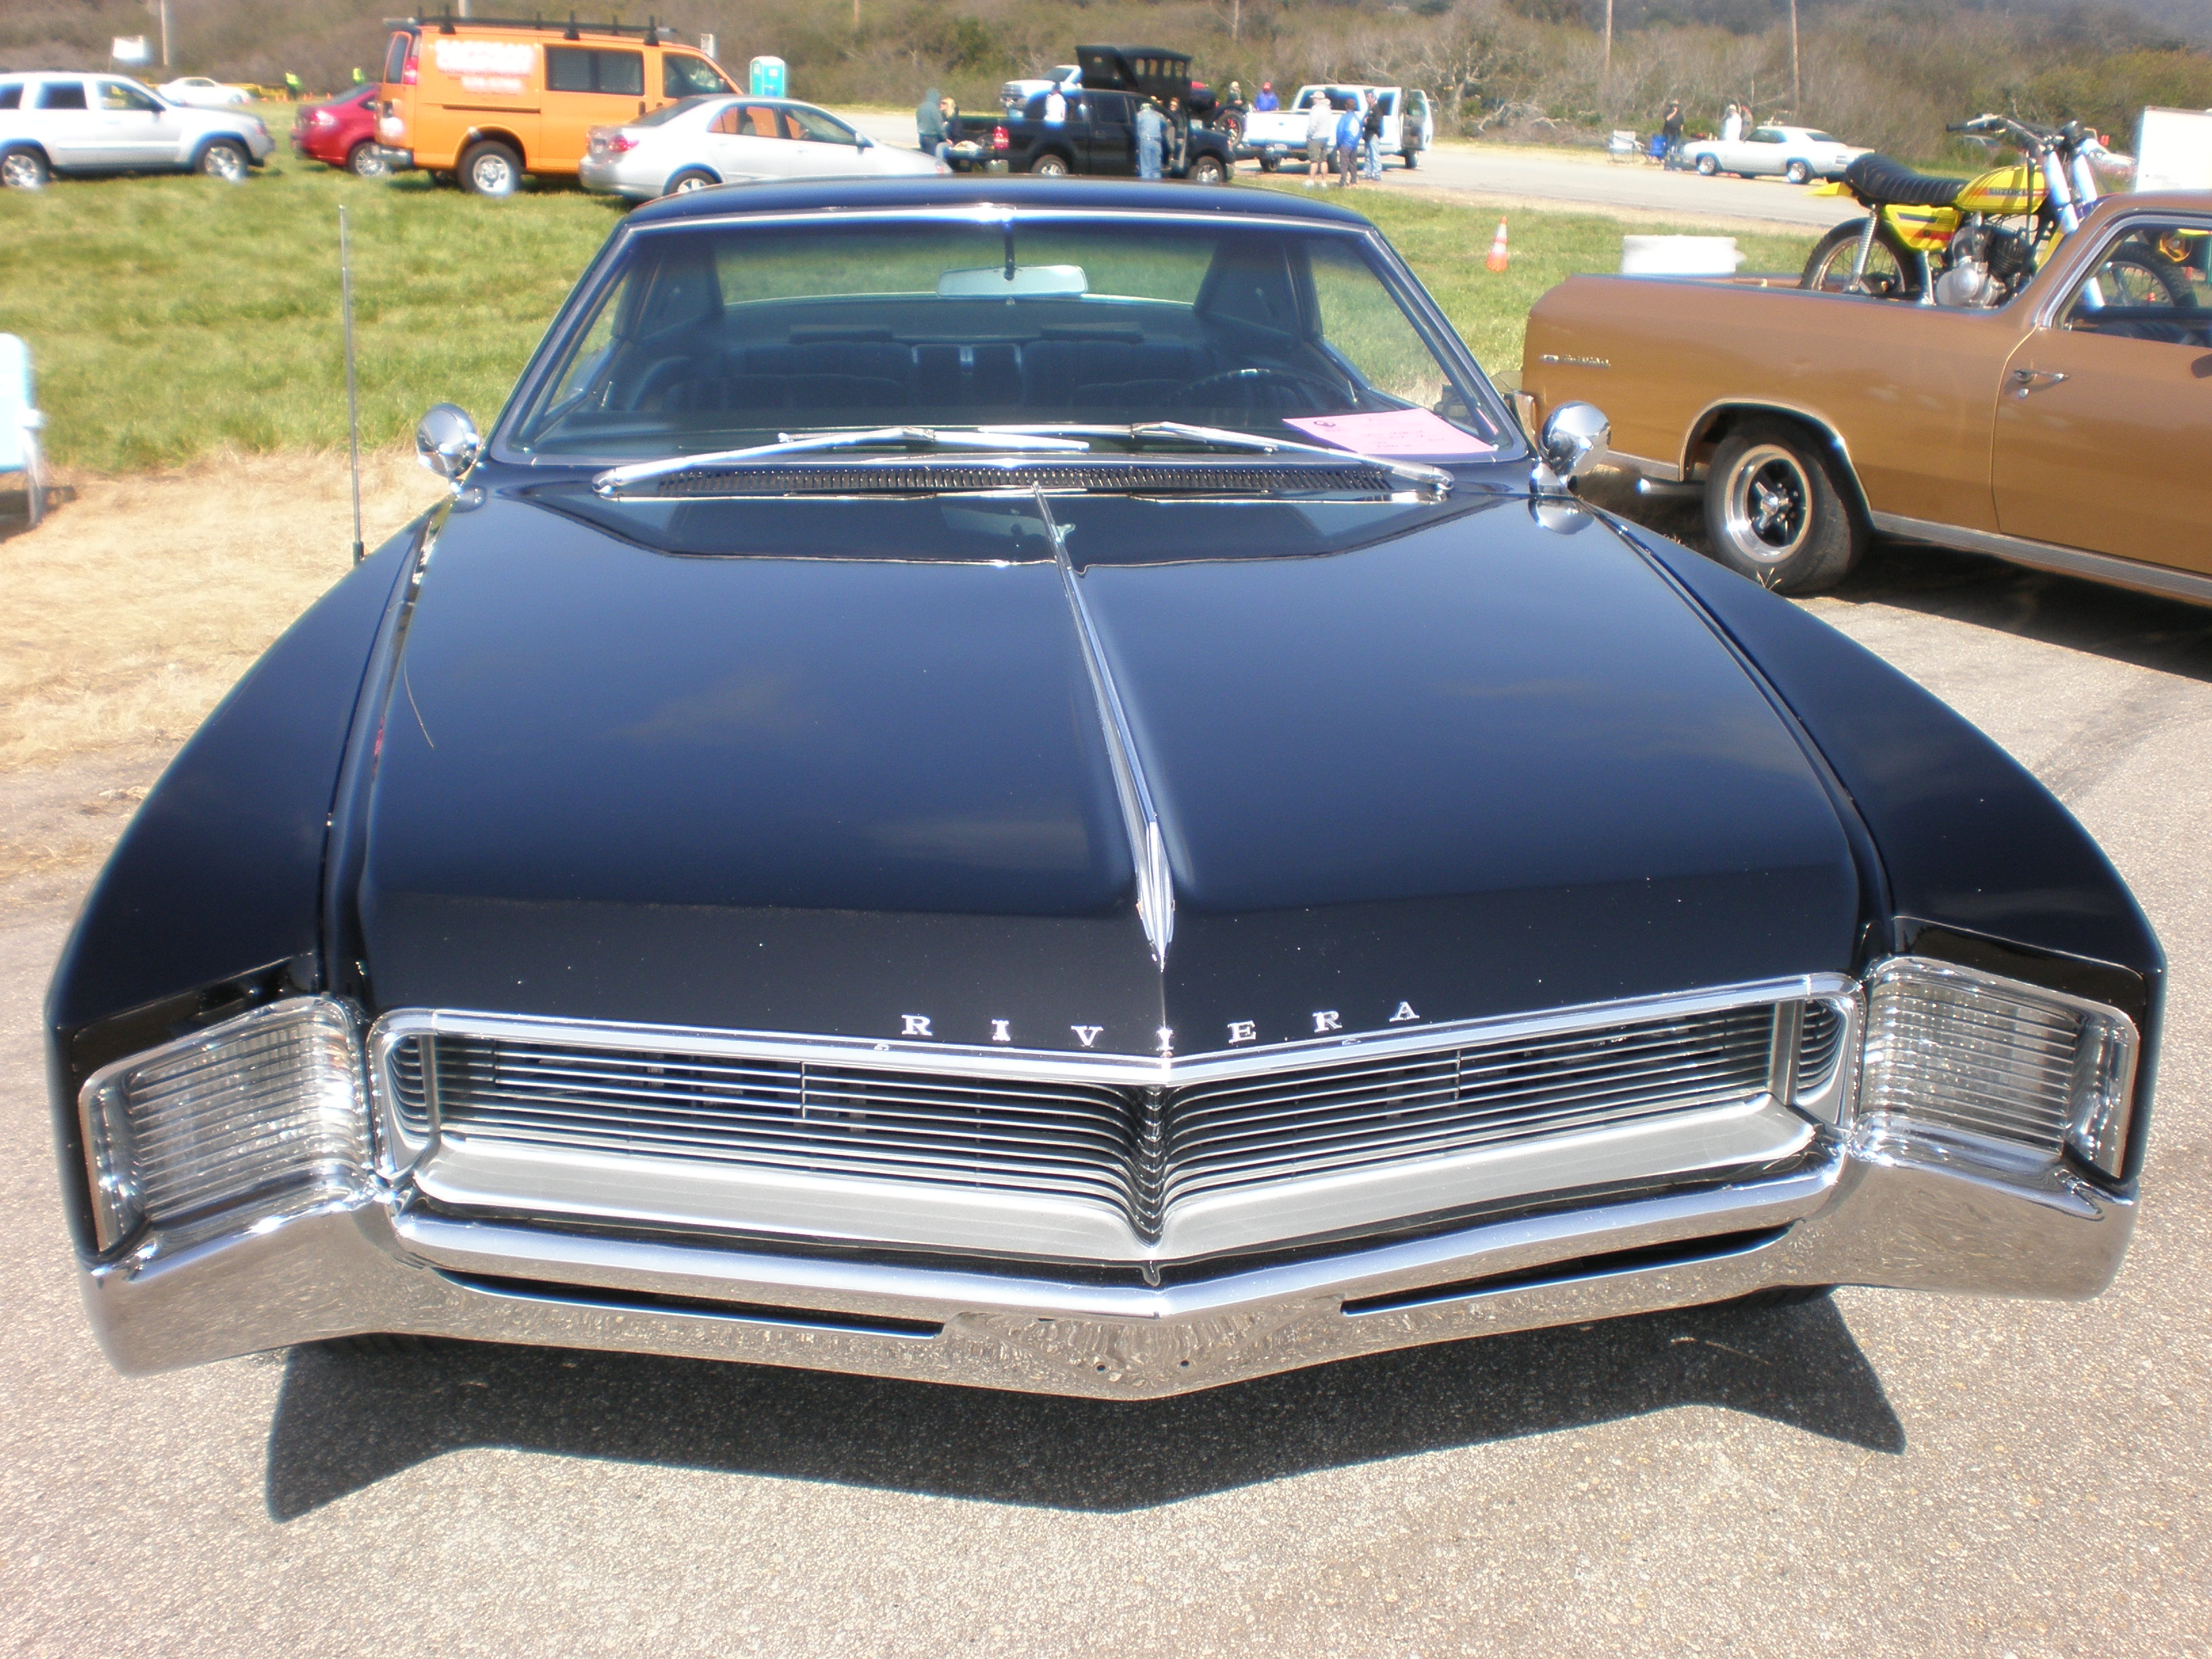 3264x2448 > Buick Riviera Wallpapers